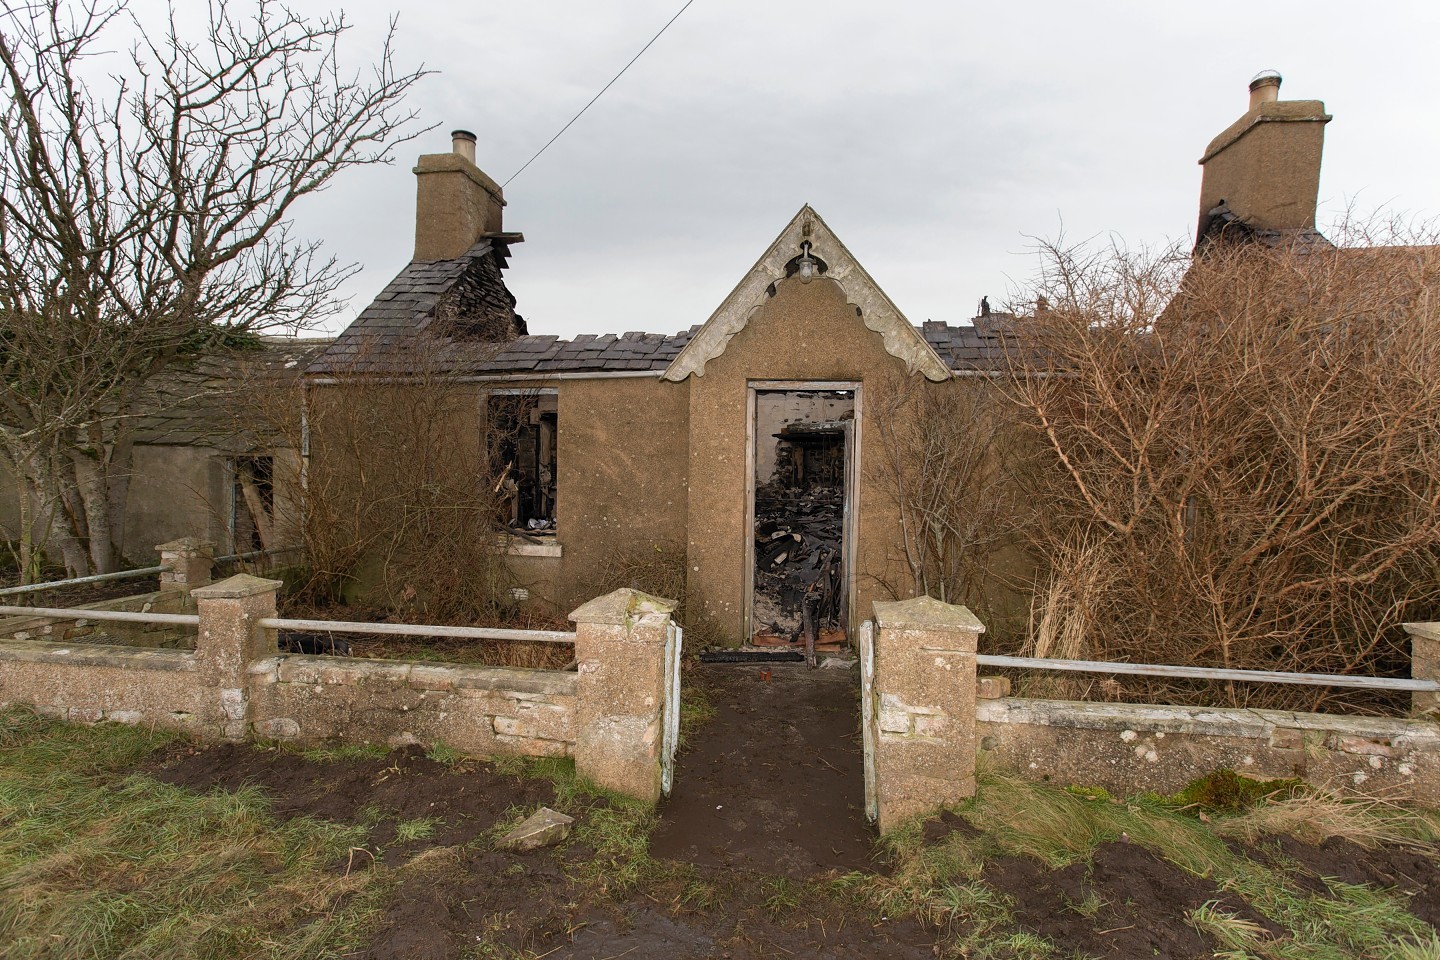 The roof and interior of a croft house at Scarfskerry was completely destoryed by fire.